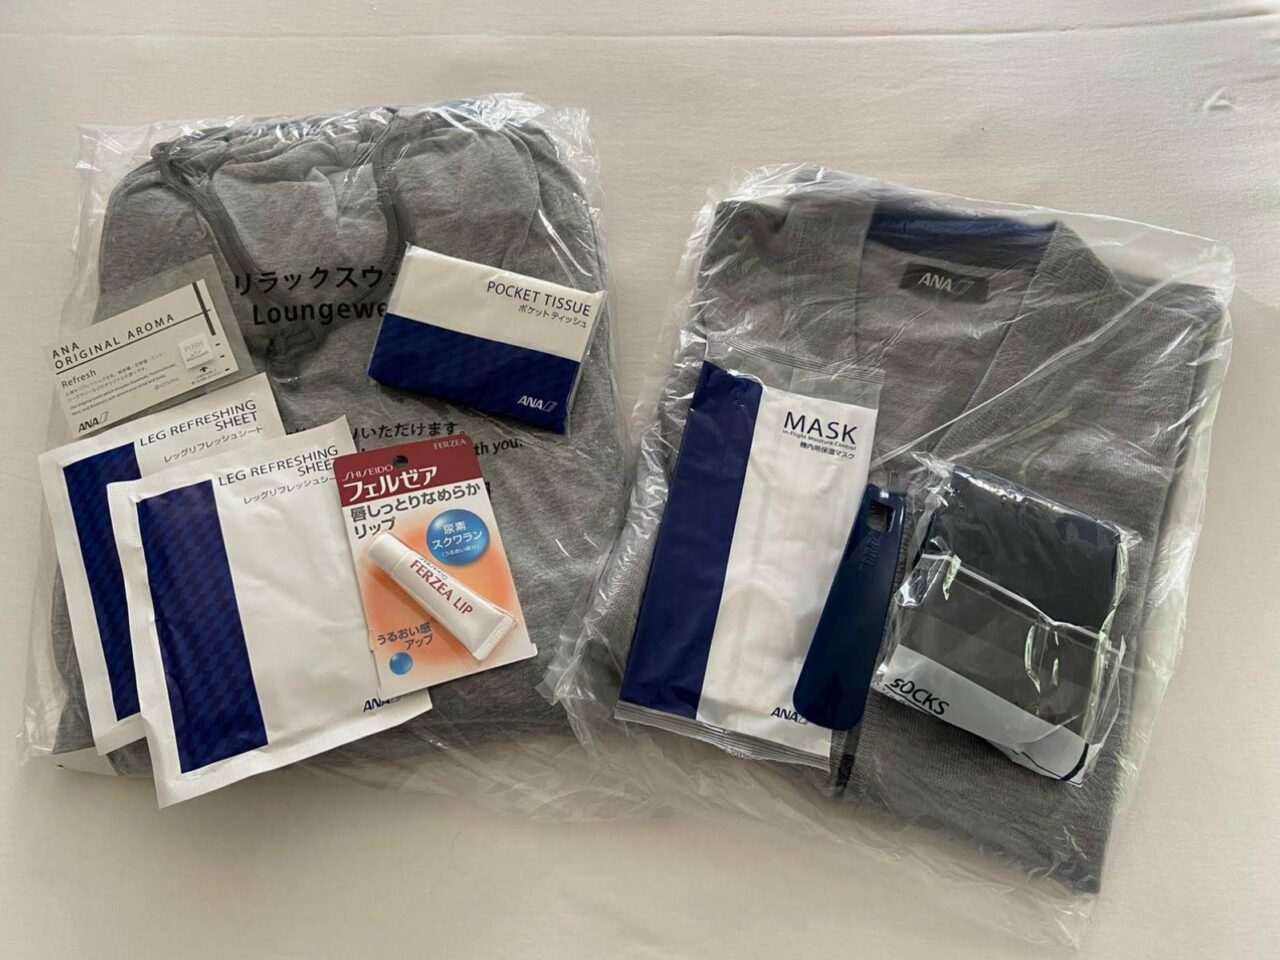 ANA First Class “The Suite” Amenity Kit 